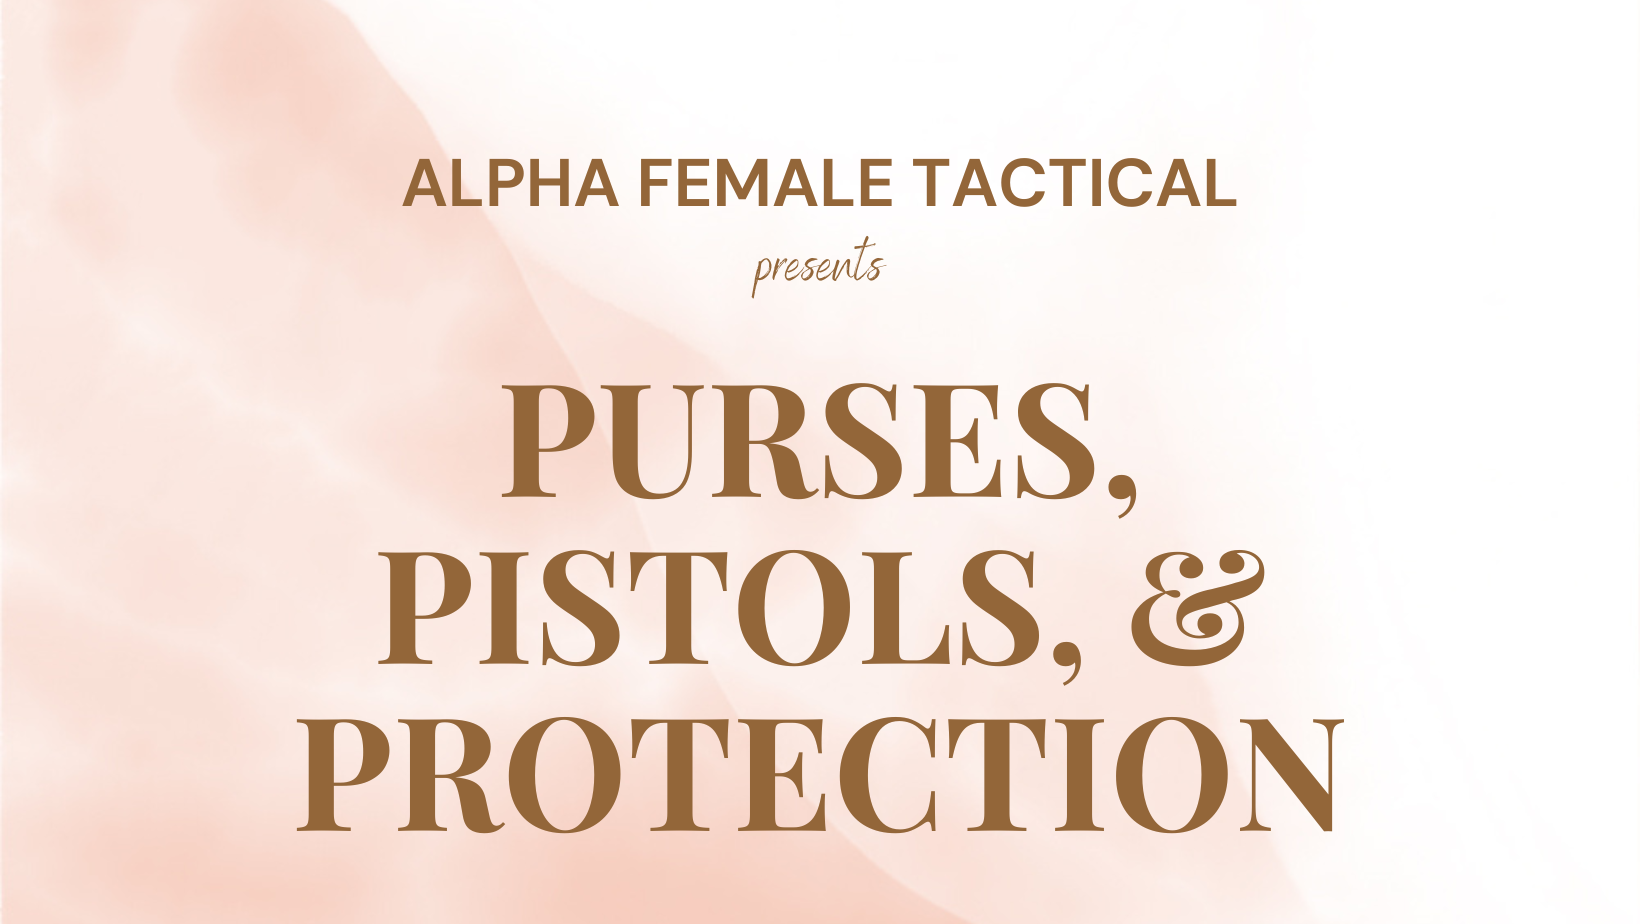 Alpha Female Tactical presents Purses, Pistols, and Protection